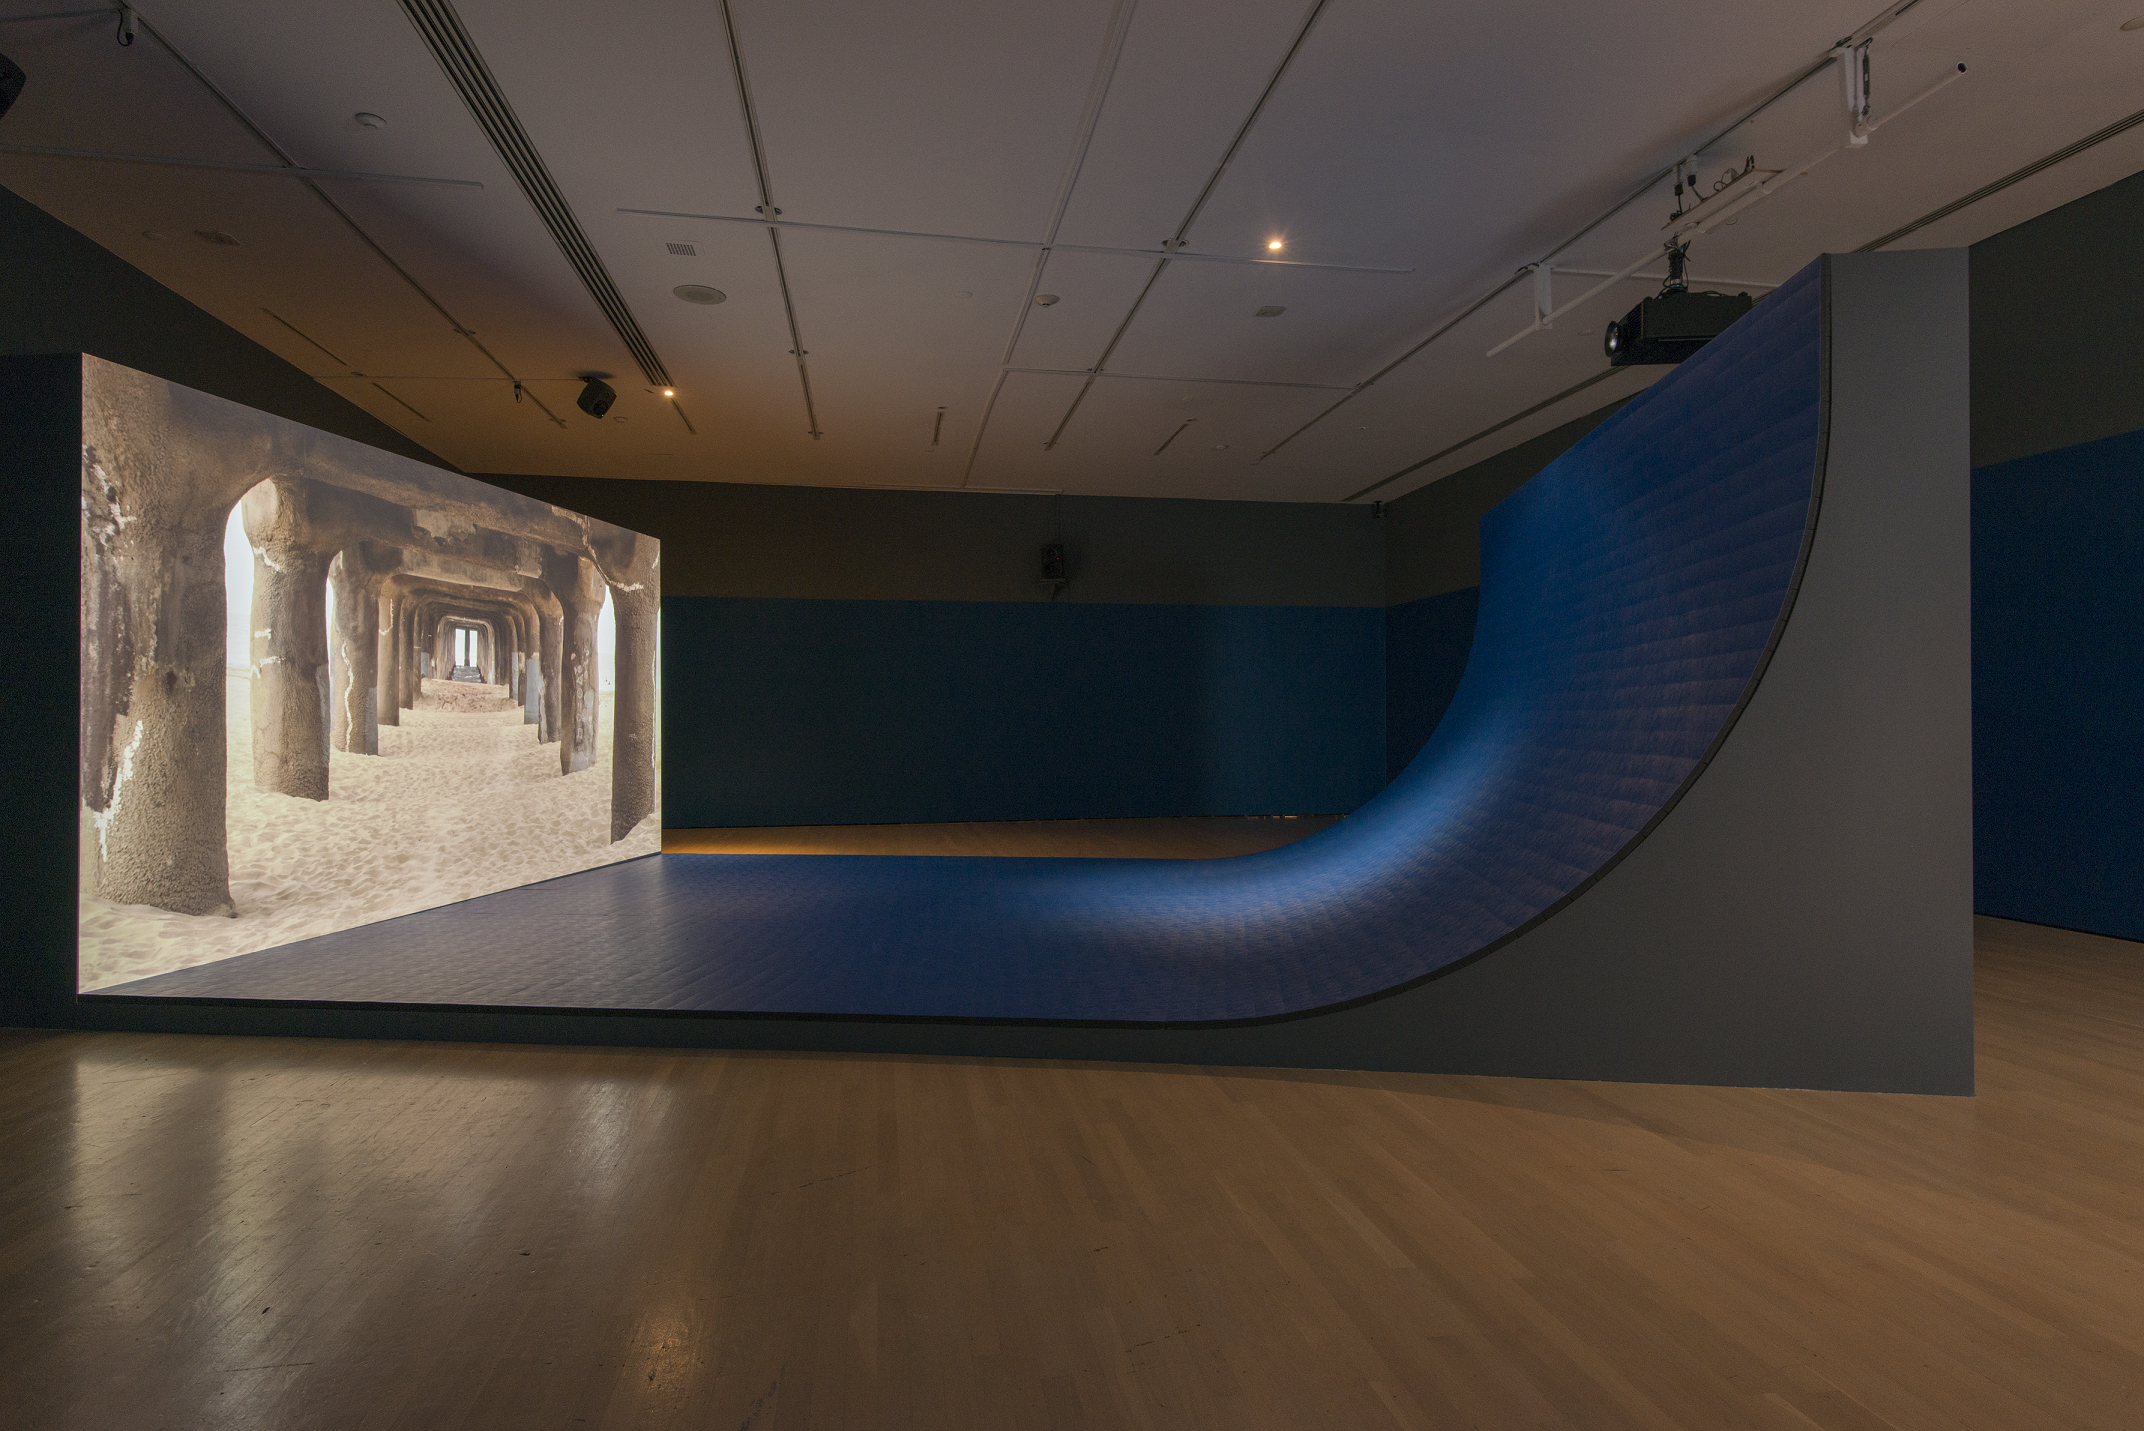 Hito Steyerl, Liquidity Inc., 2014, Single-channel HD video, colour, sound, 30 min and architectural structure, 1/7 257 x 450 x 40 cm (architectural structure), Musée d'art contemporain de Montréal. Photo by Paul Litherland.